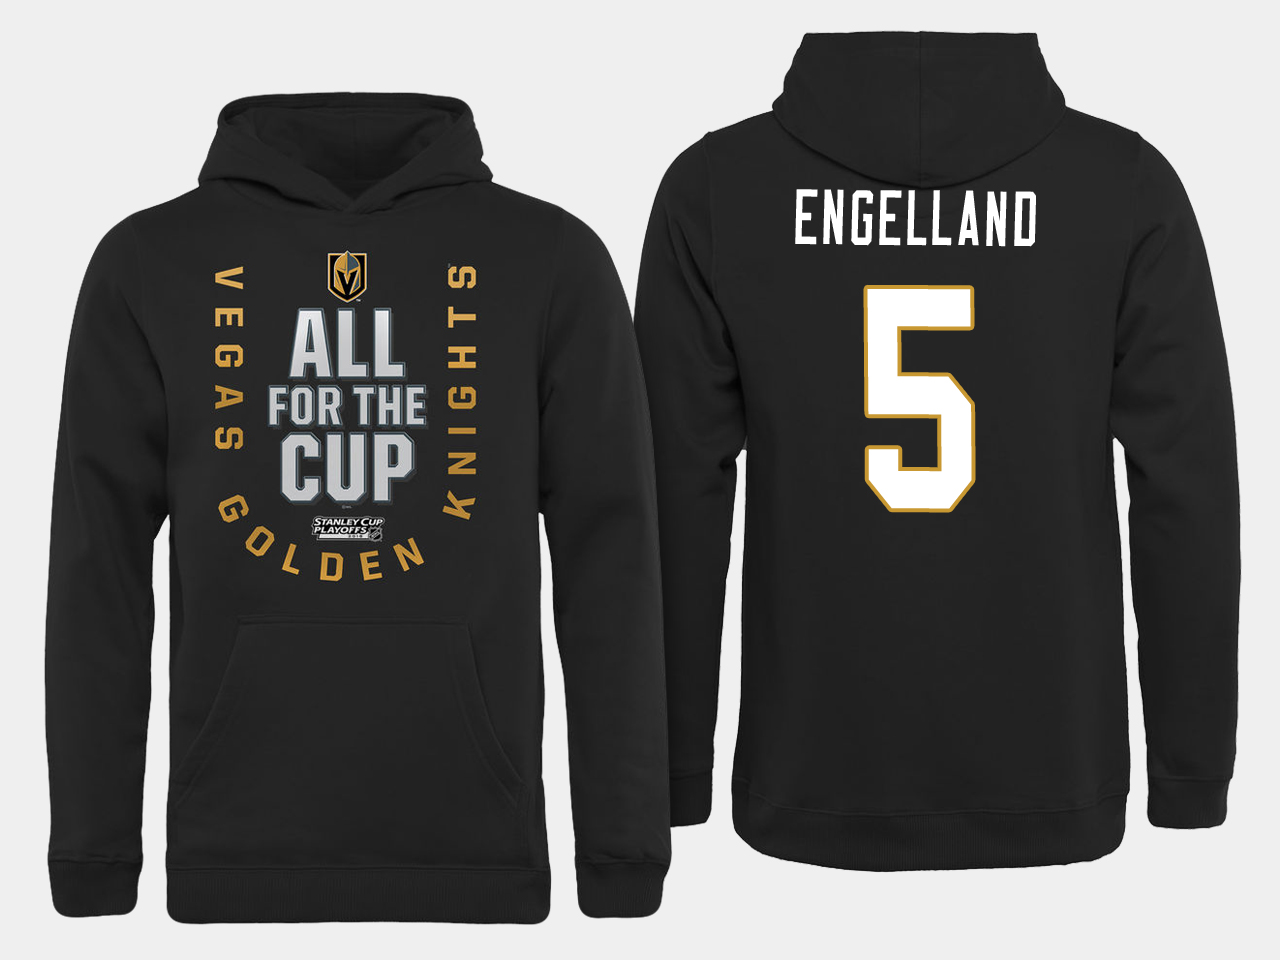 Men NHL Vegas Golden Knights #5 Engelland All for the Cup hoodie->more nhl jerseys->NHL Jersey